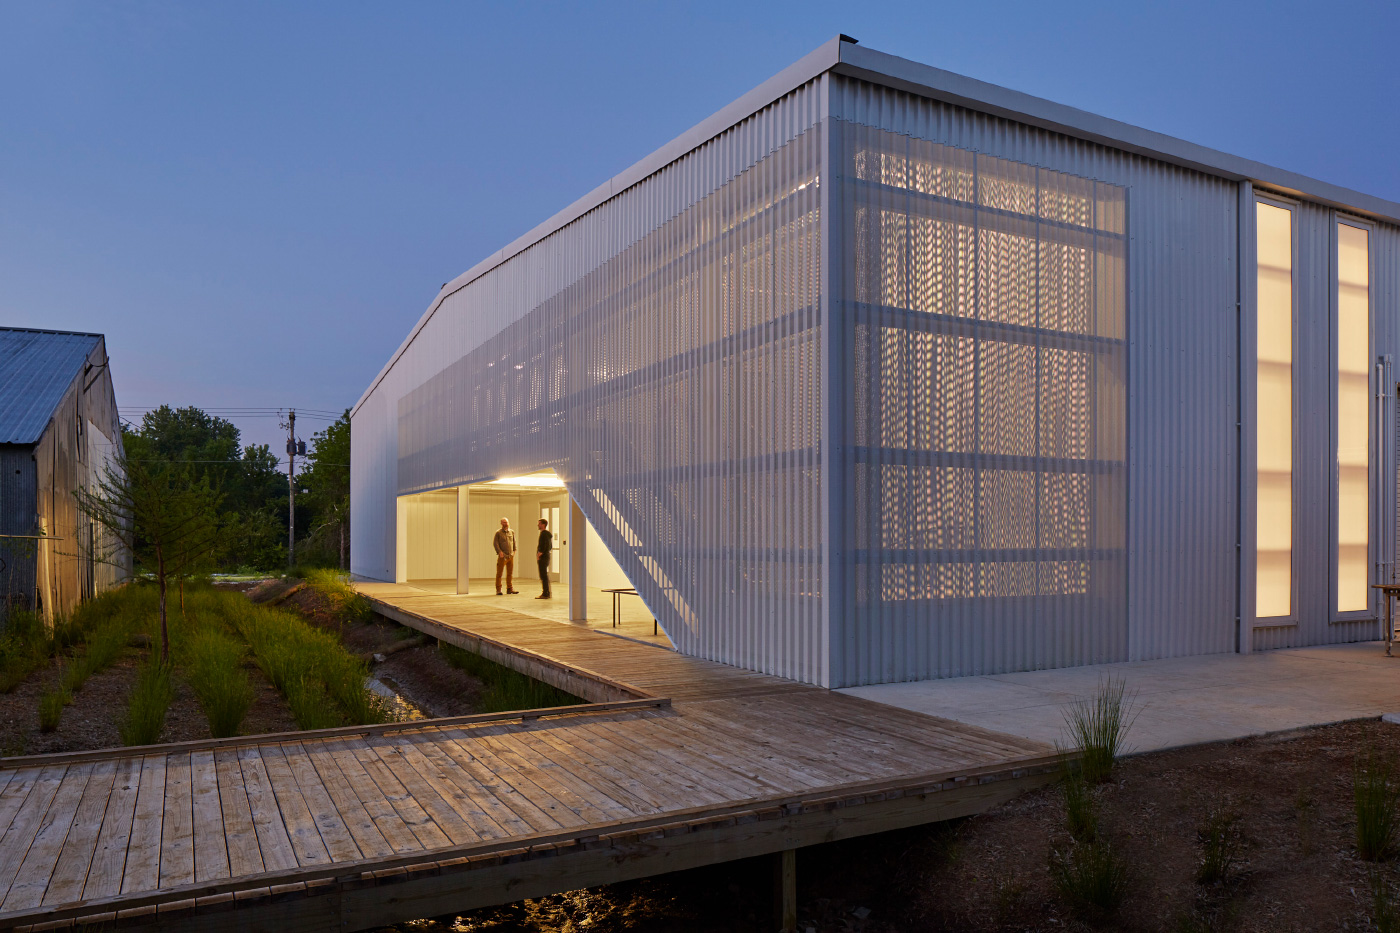 A warehouse clad in perforated aluminum, for the University of Arkansas